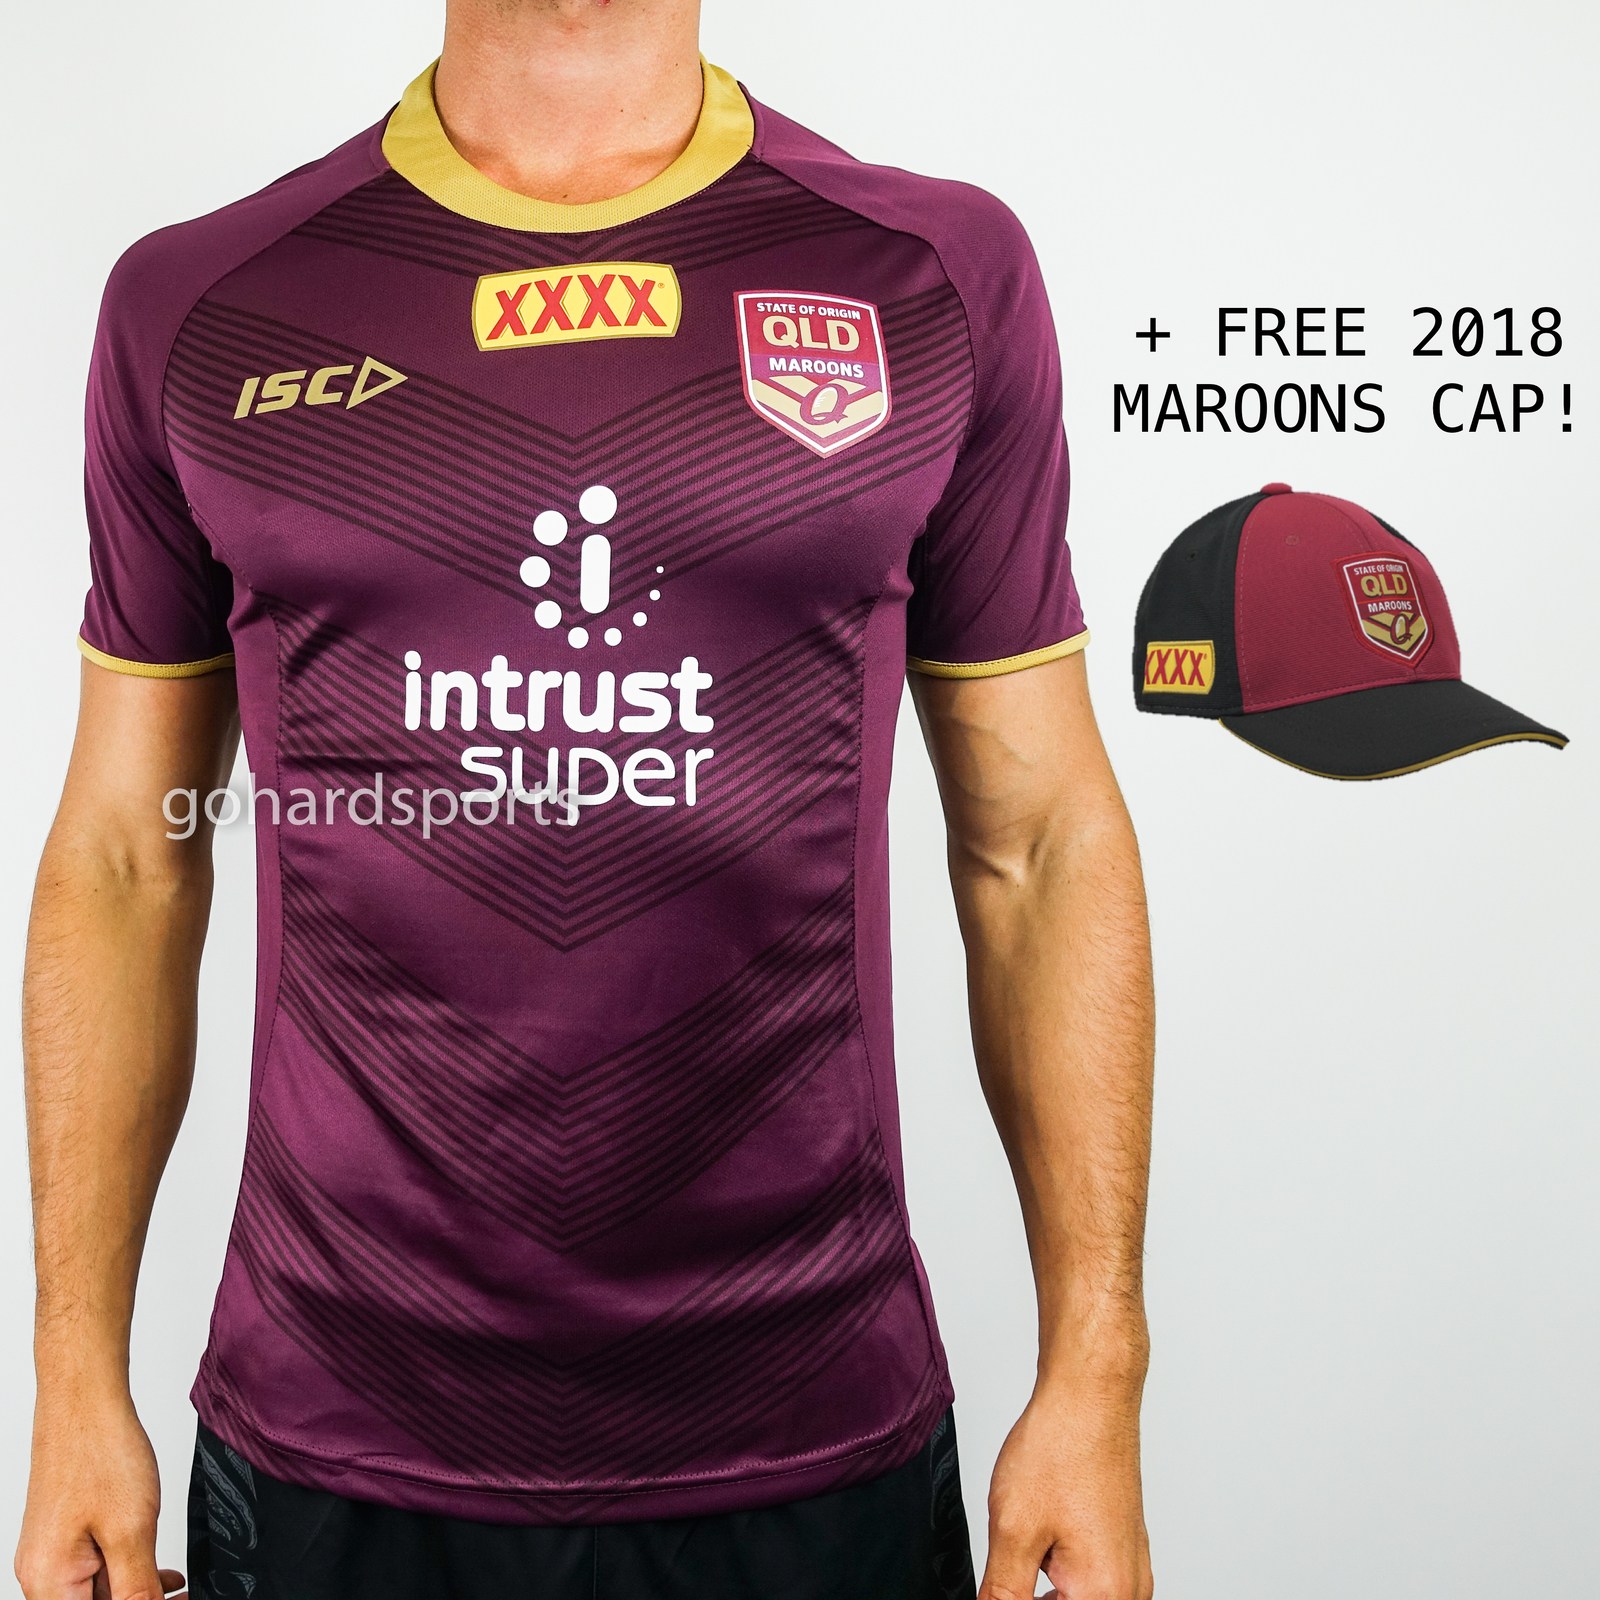 State of Origin Football T-Shirt 1 Memorial Rugby Jersey MGRH 2018 Maroons No Rugby Training Shirt 